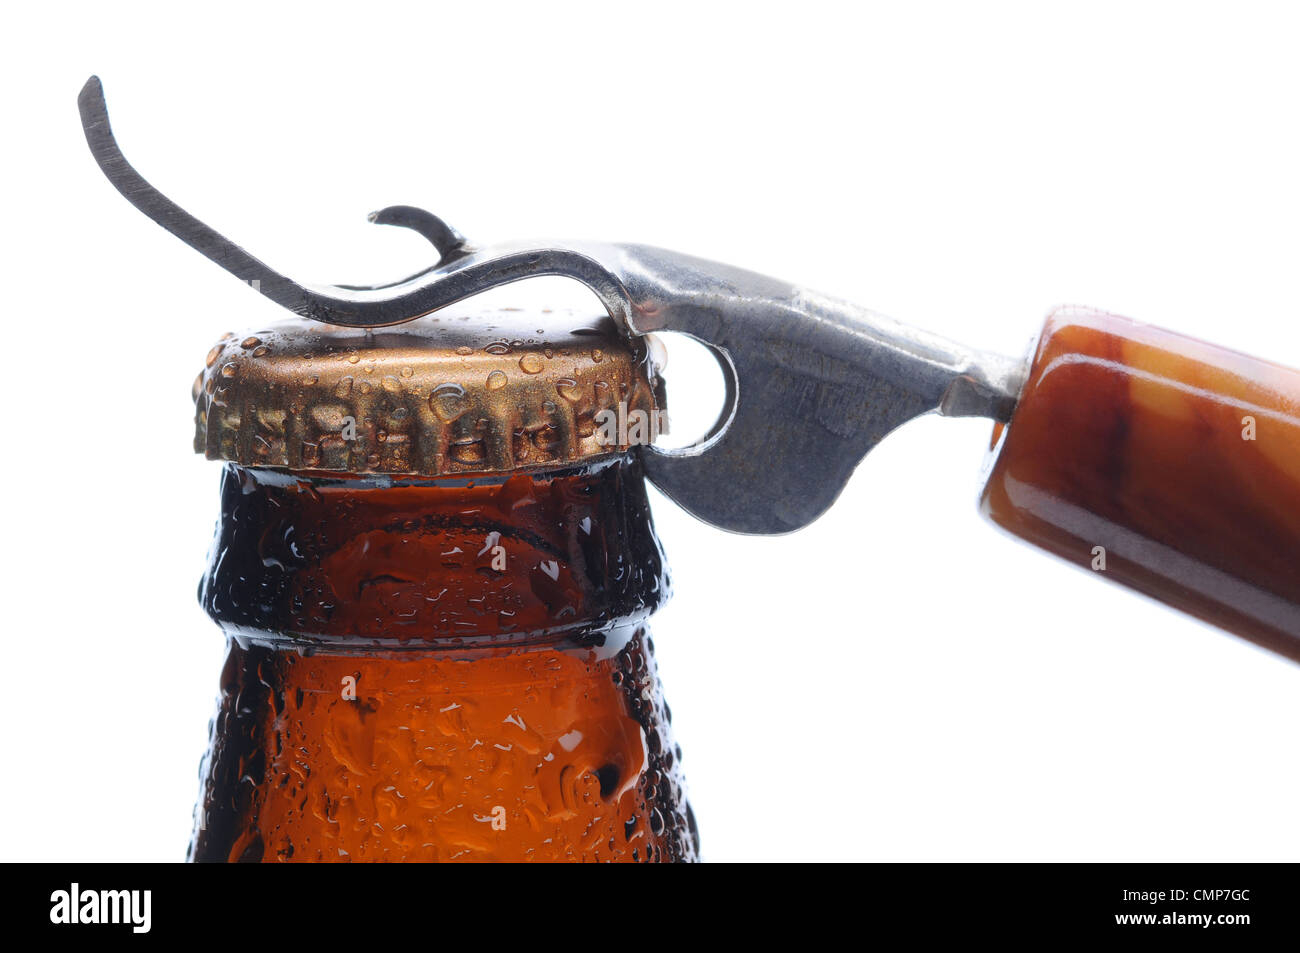 Macro shot of a brown beer bottle with an opener ready to pry up the bottle cap. Stock Photo